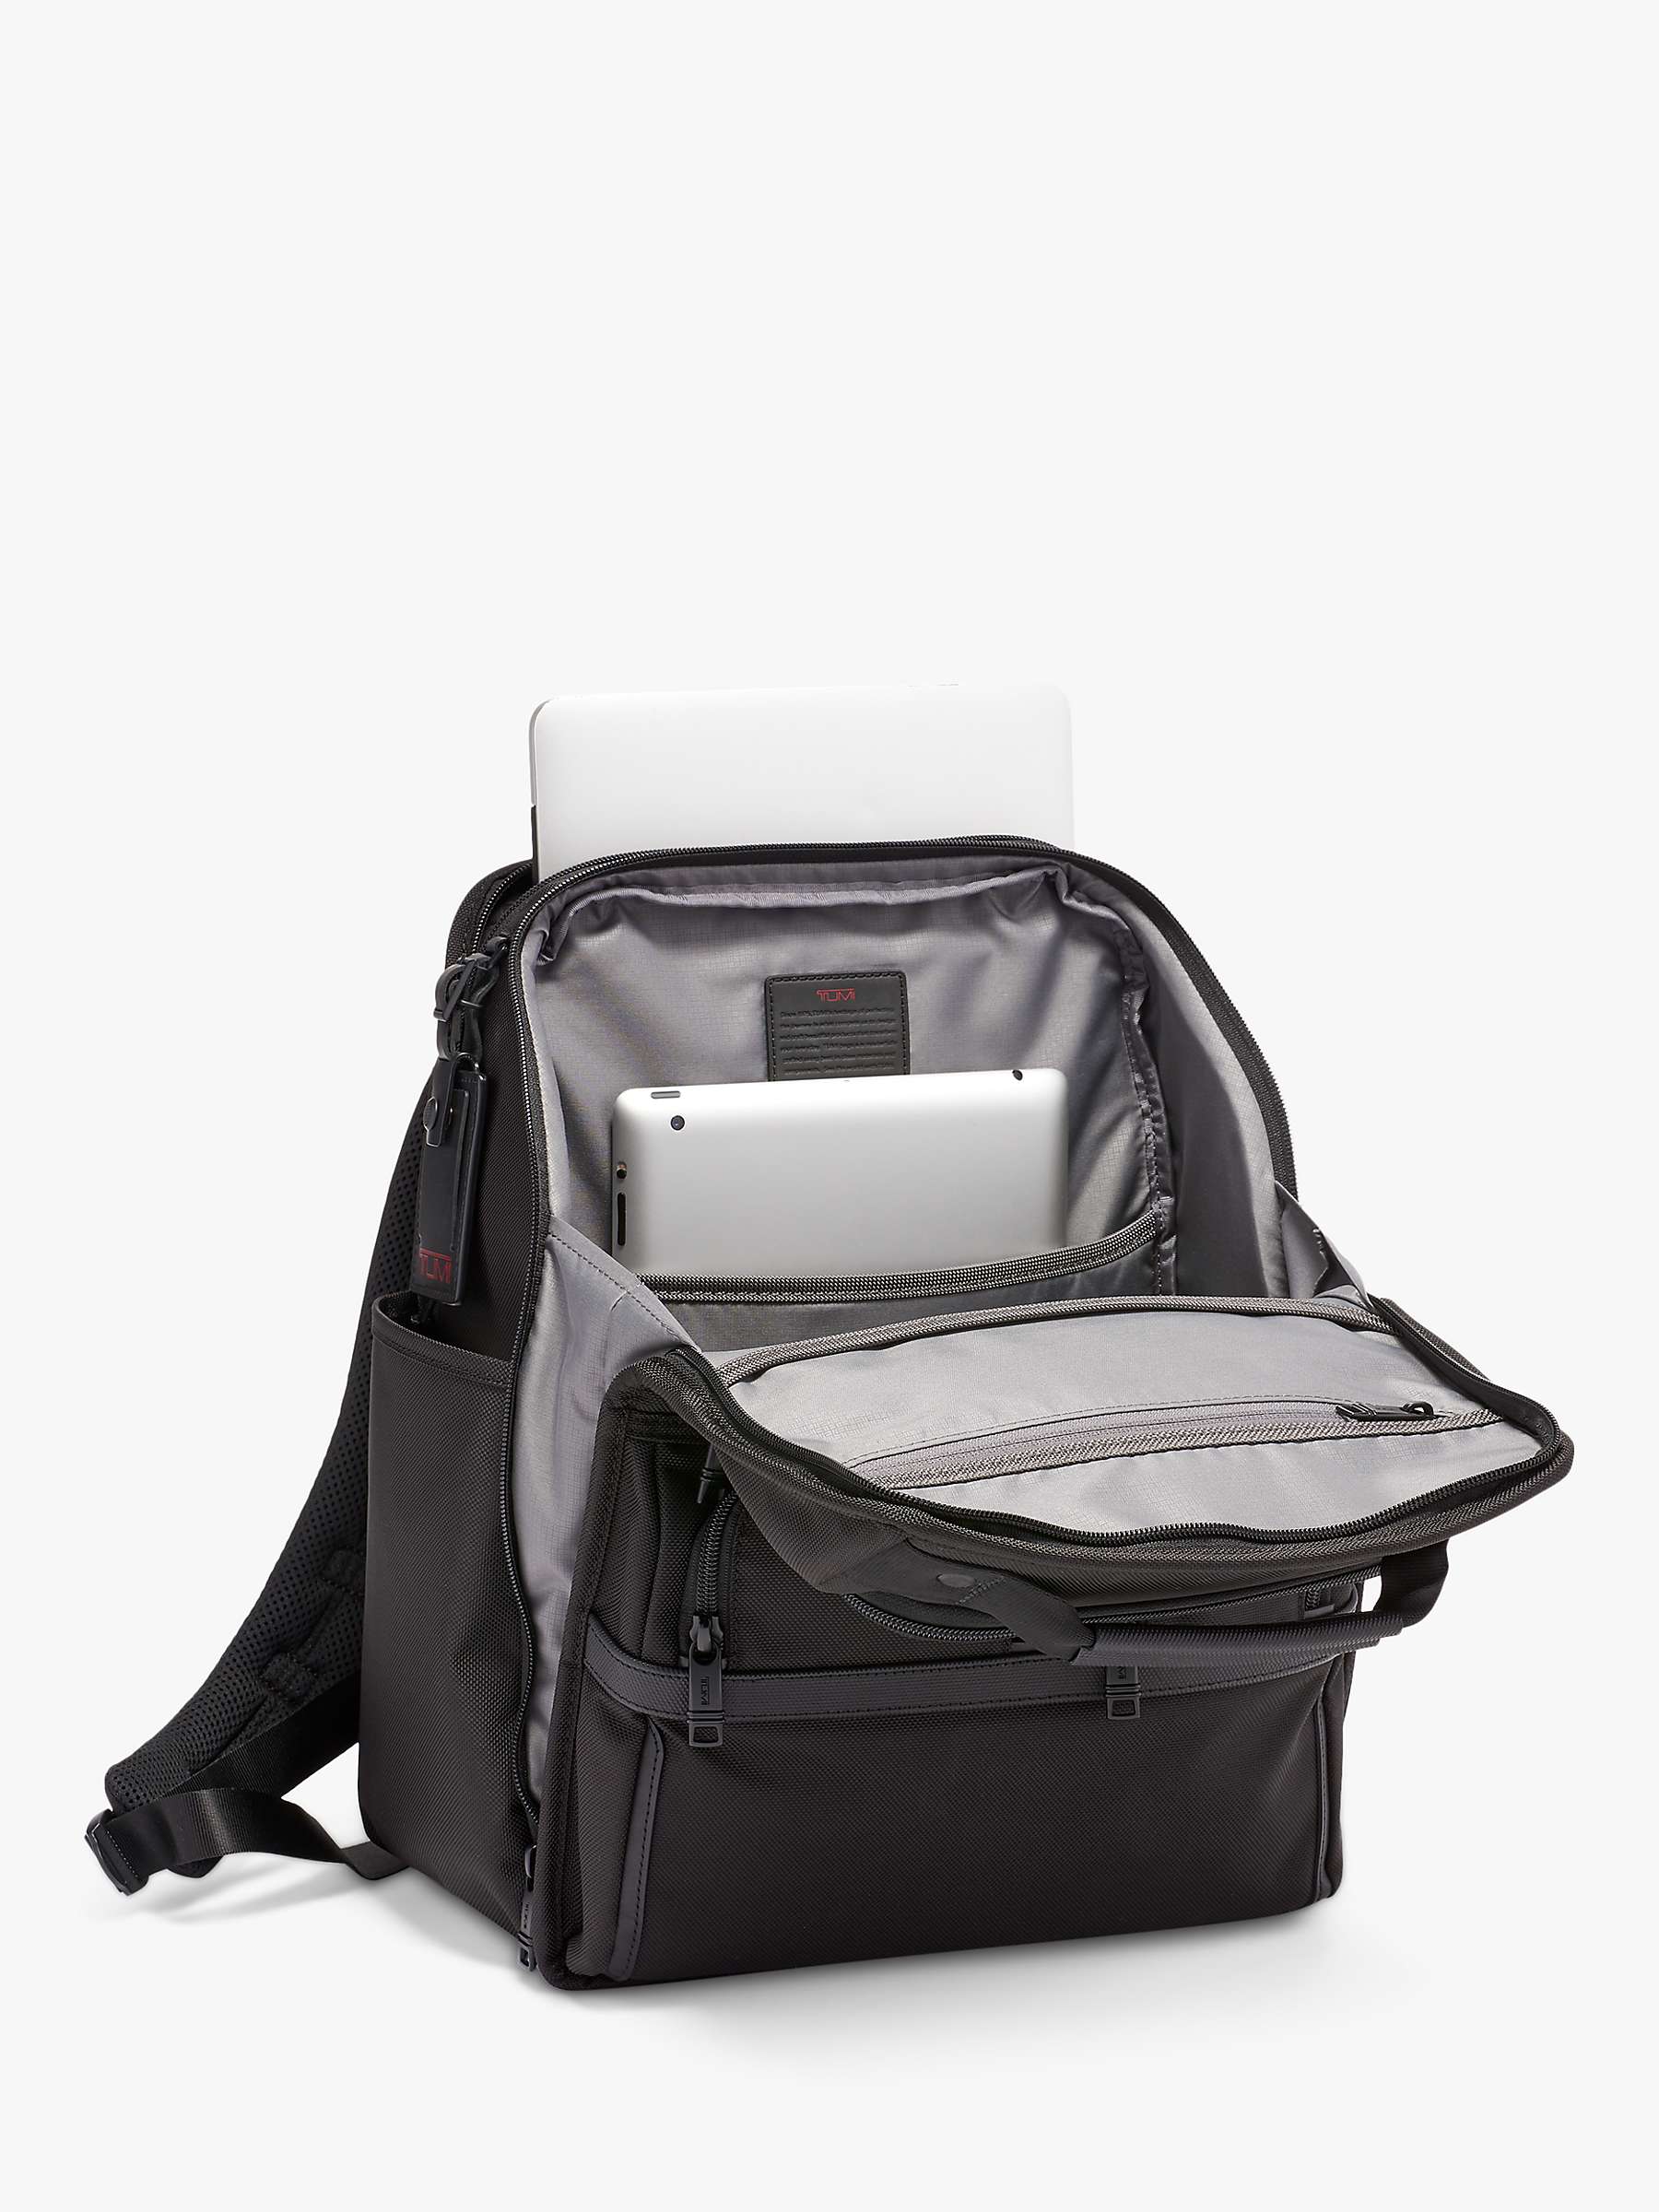 Buy TUMI Alpha 3 Compact Laptop Brief Pack Backpack, Black Online at johnlewis.com